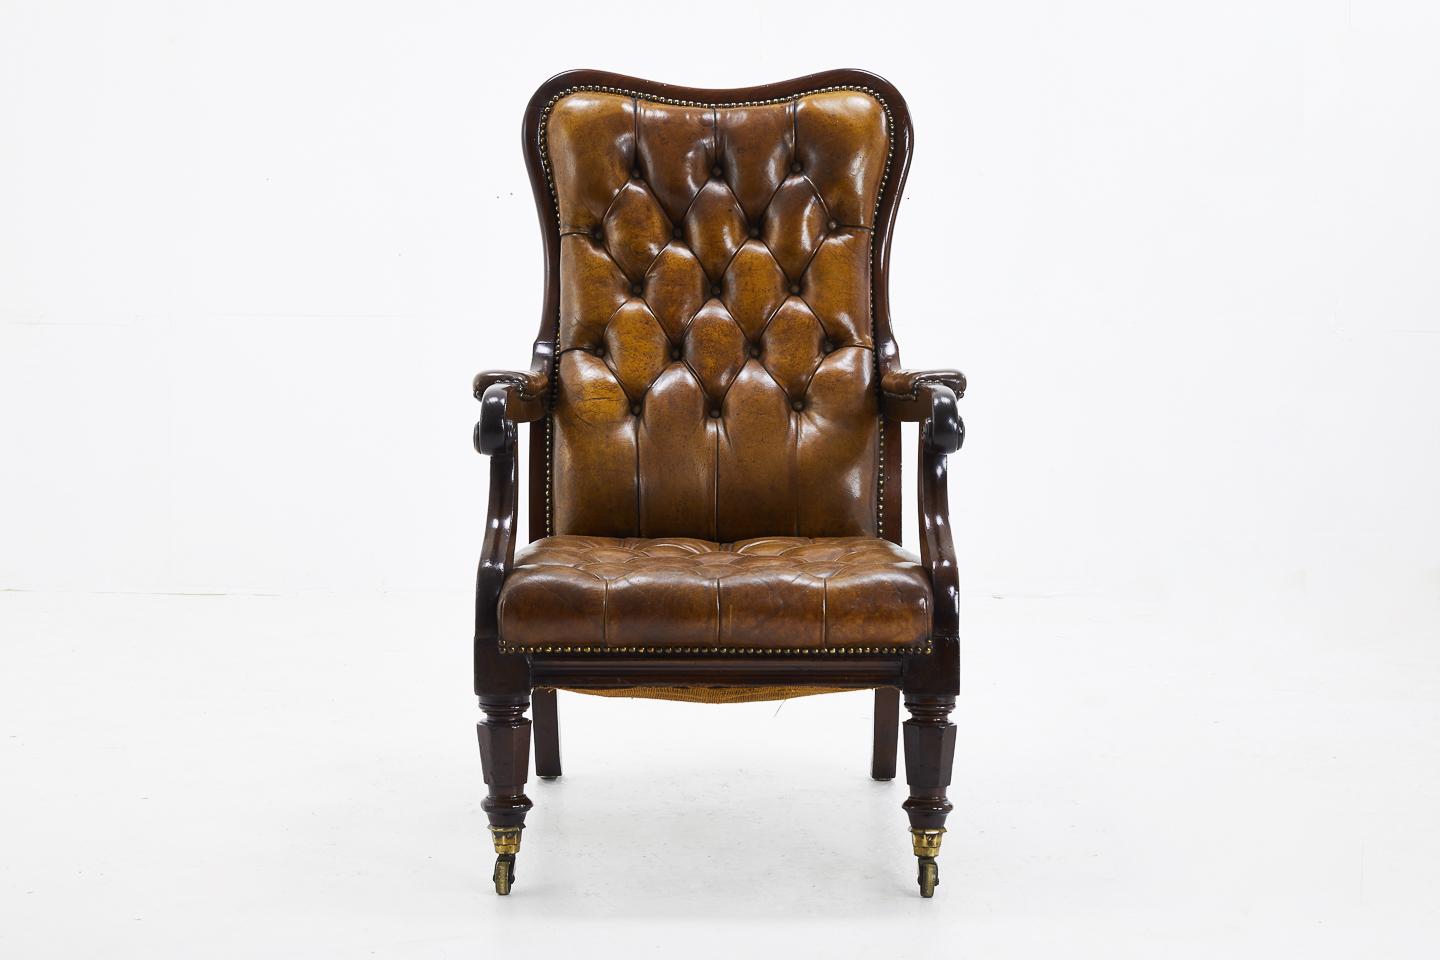 Early 19th century mahogany English library chair, nicely upholstered in leather.

Measures: Seat height: 41 cm
Seat depth: 56 cm.
  